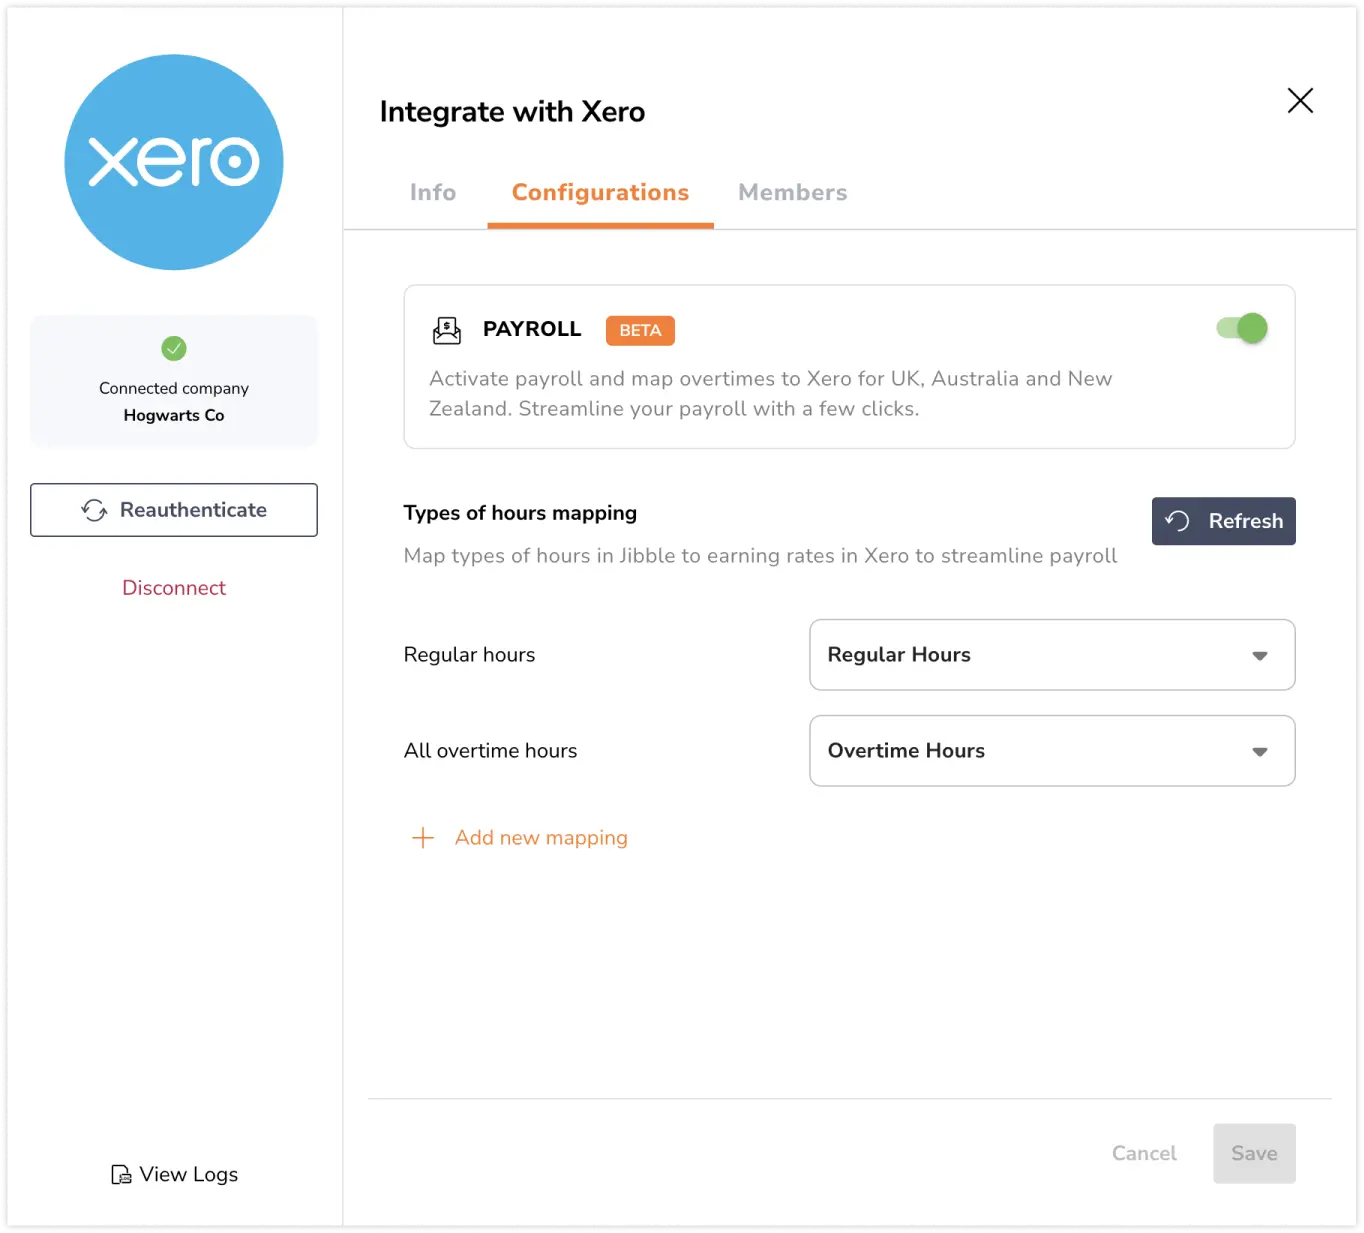 Enabling mapping of hours in Jibble to earning rates in Xero